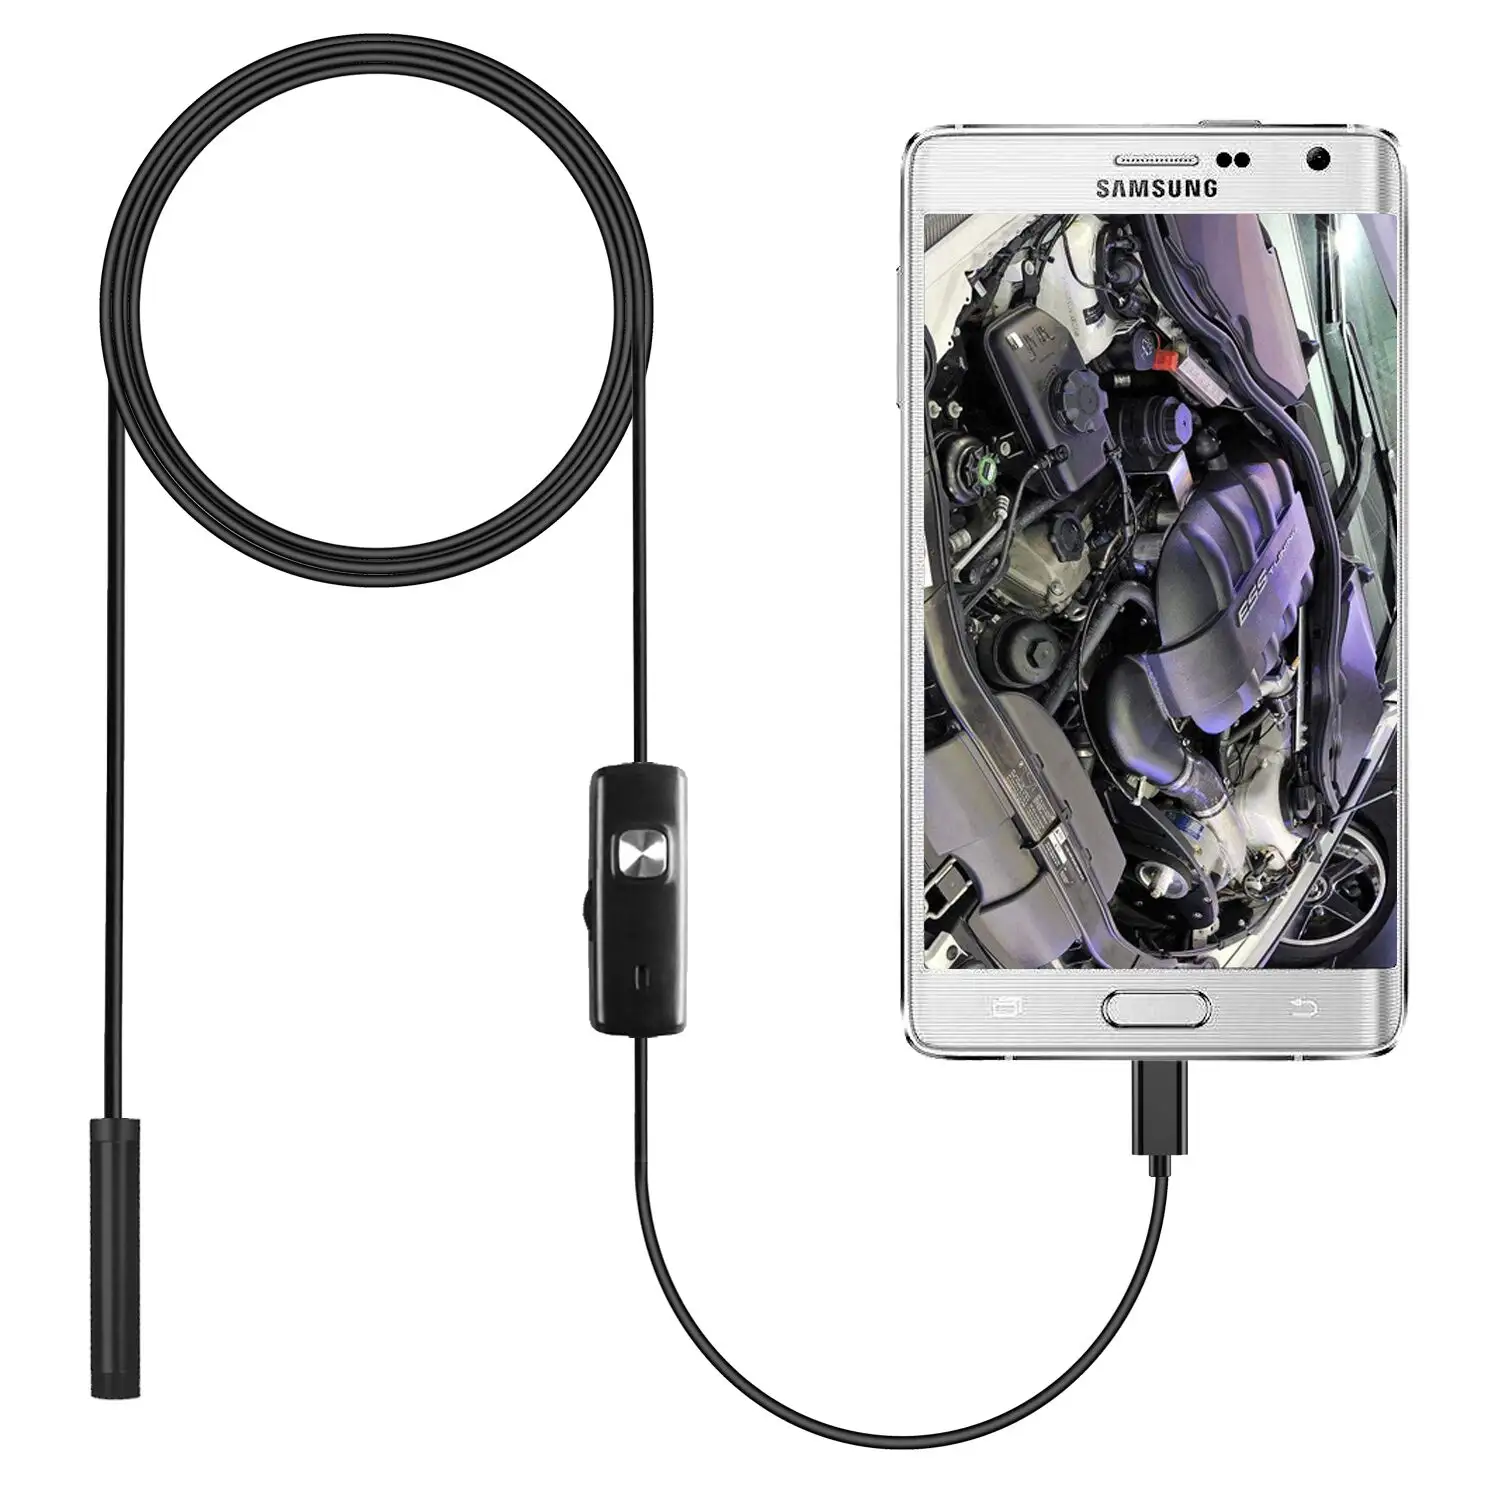 AN97 PC Android Endoscope HD720P 8mm Lens 6LED 1m/1.5m/2m/3.5m/5m/10m Cable Waterproof Inspection Borescope for Android Phone PC